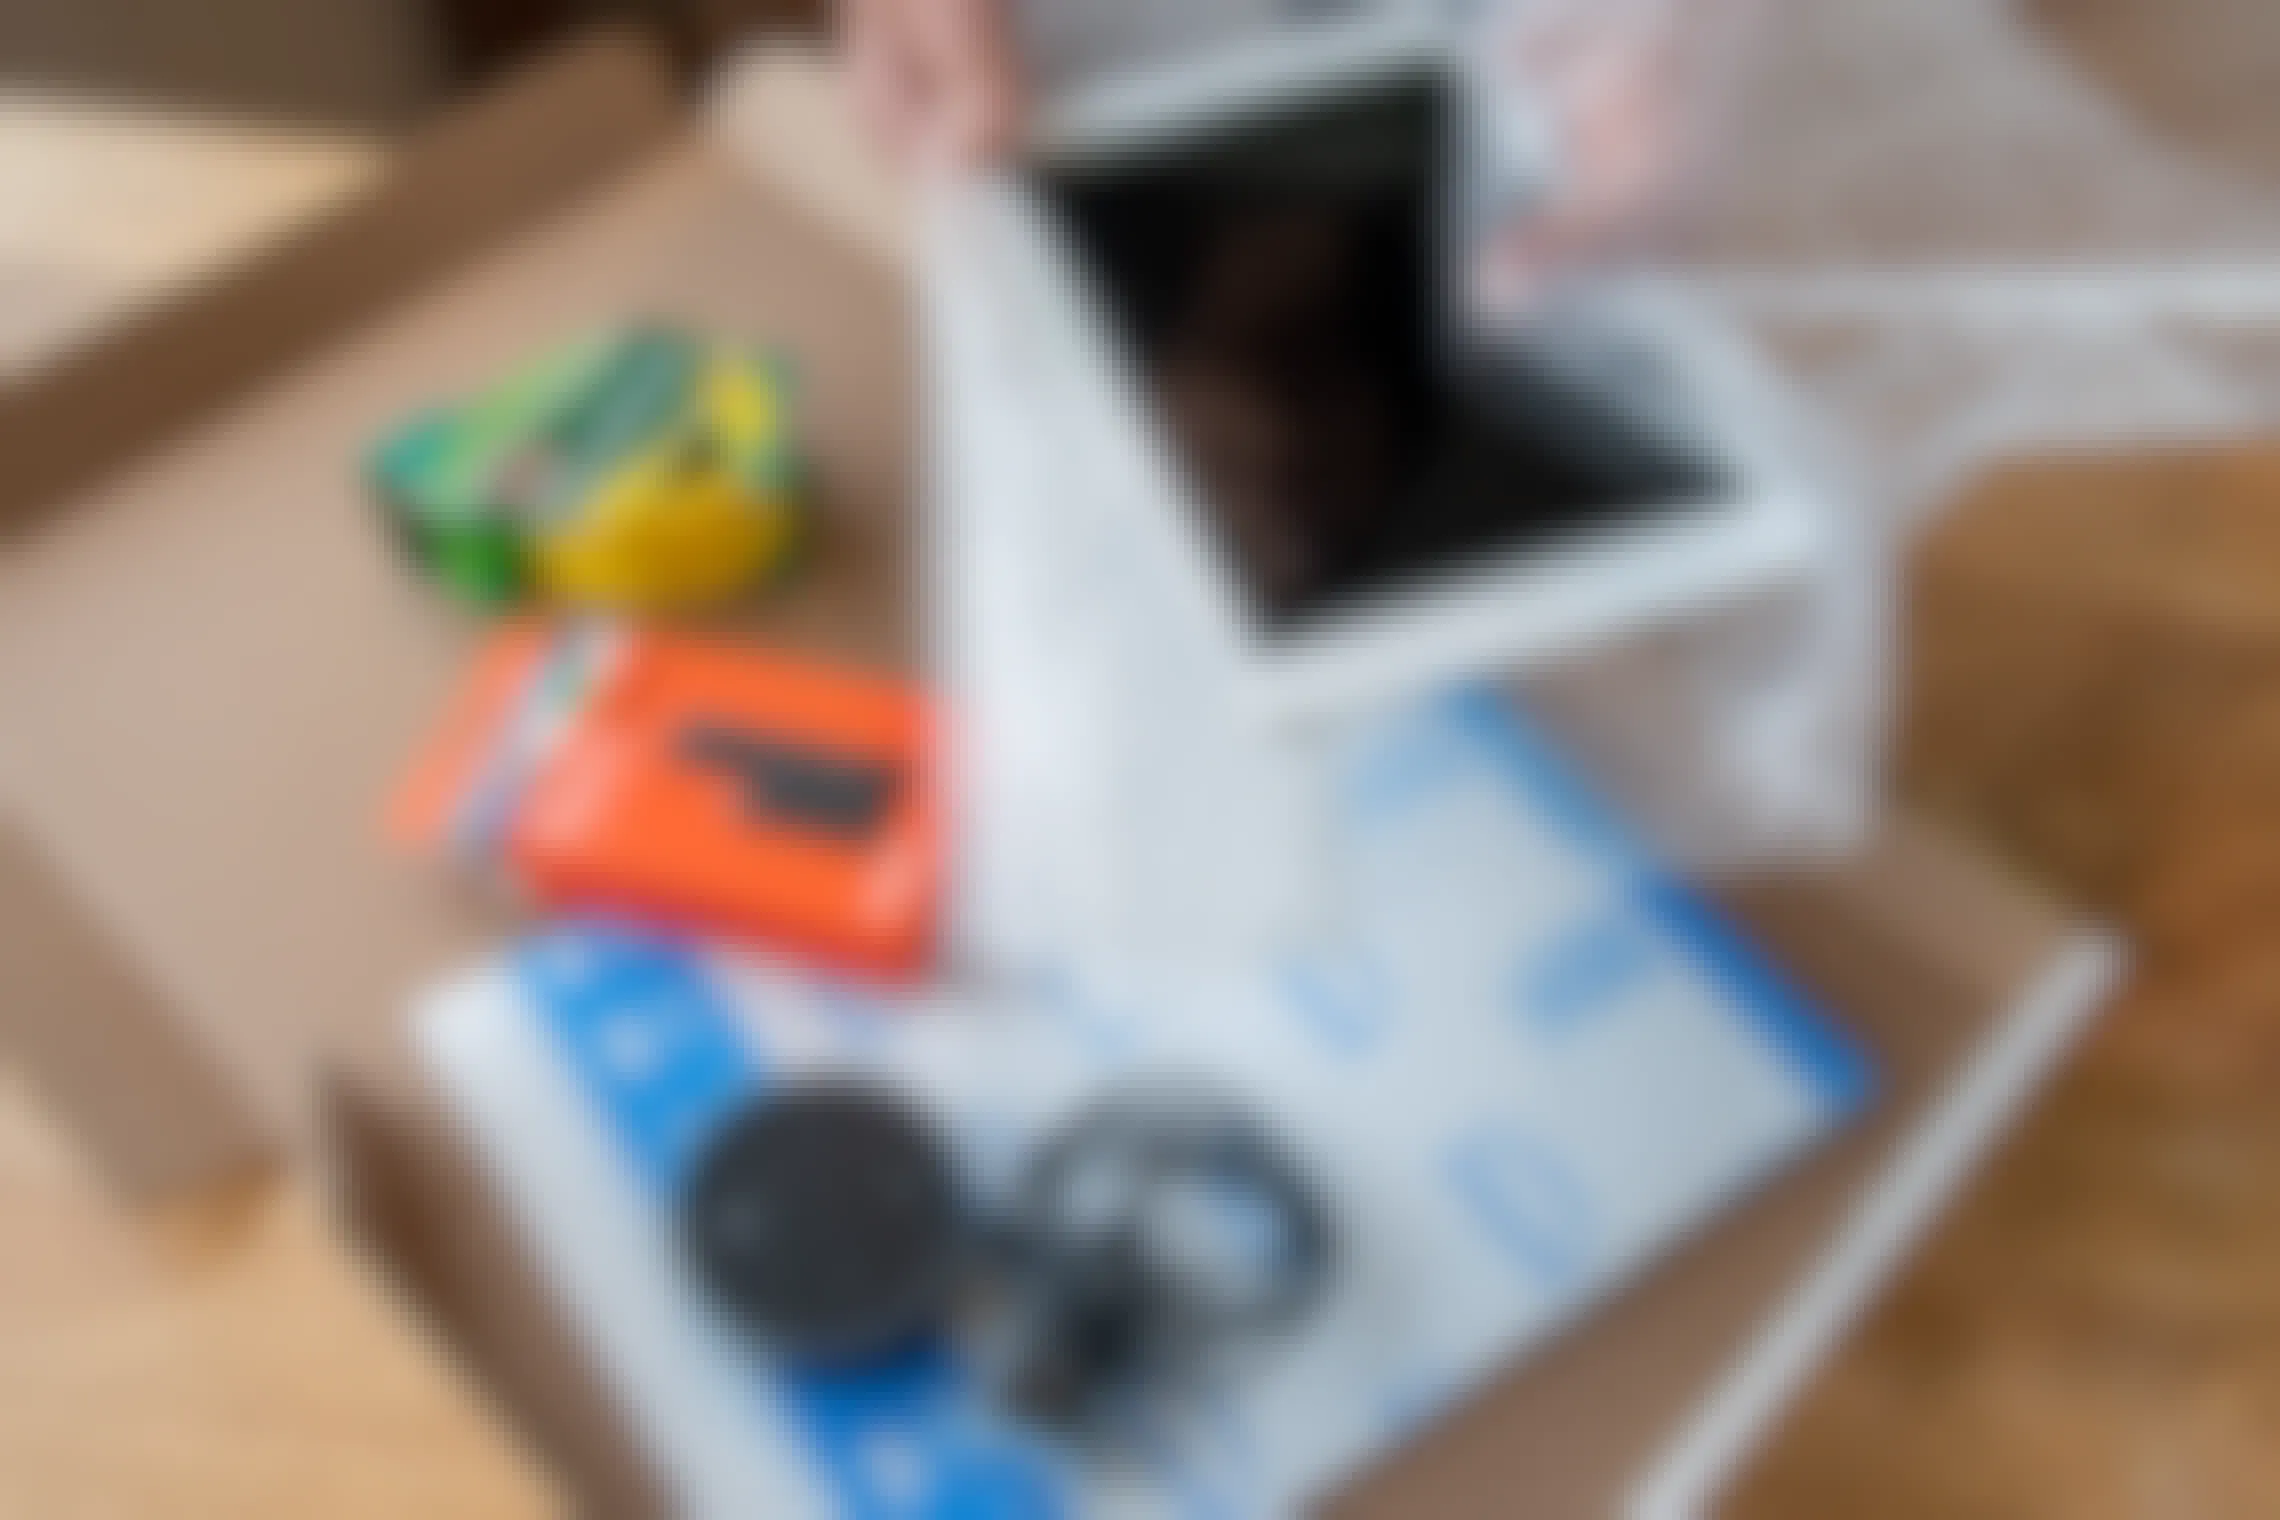 An iPad, Amazon Fire stick, and Amazon Echo dot being boxed up to ship.